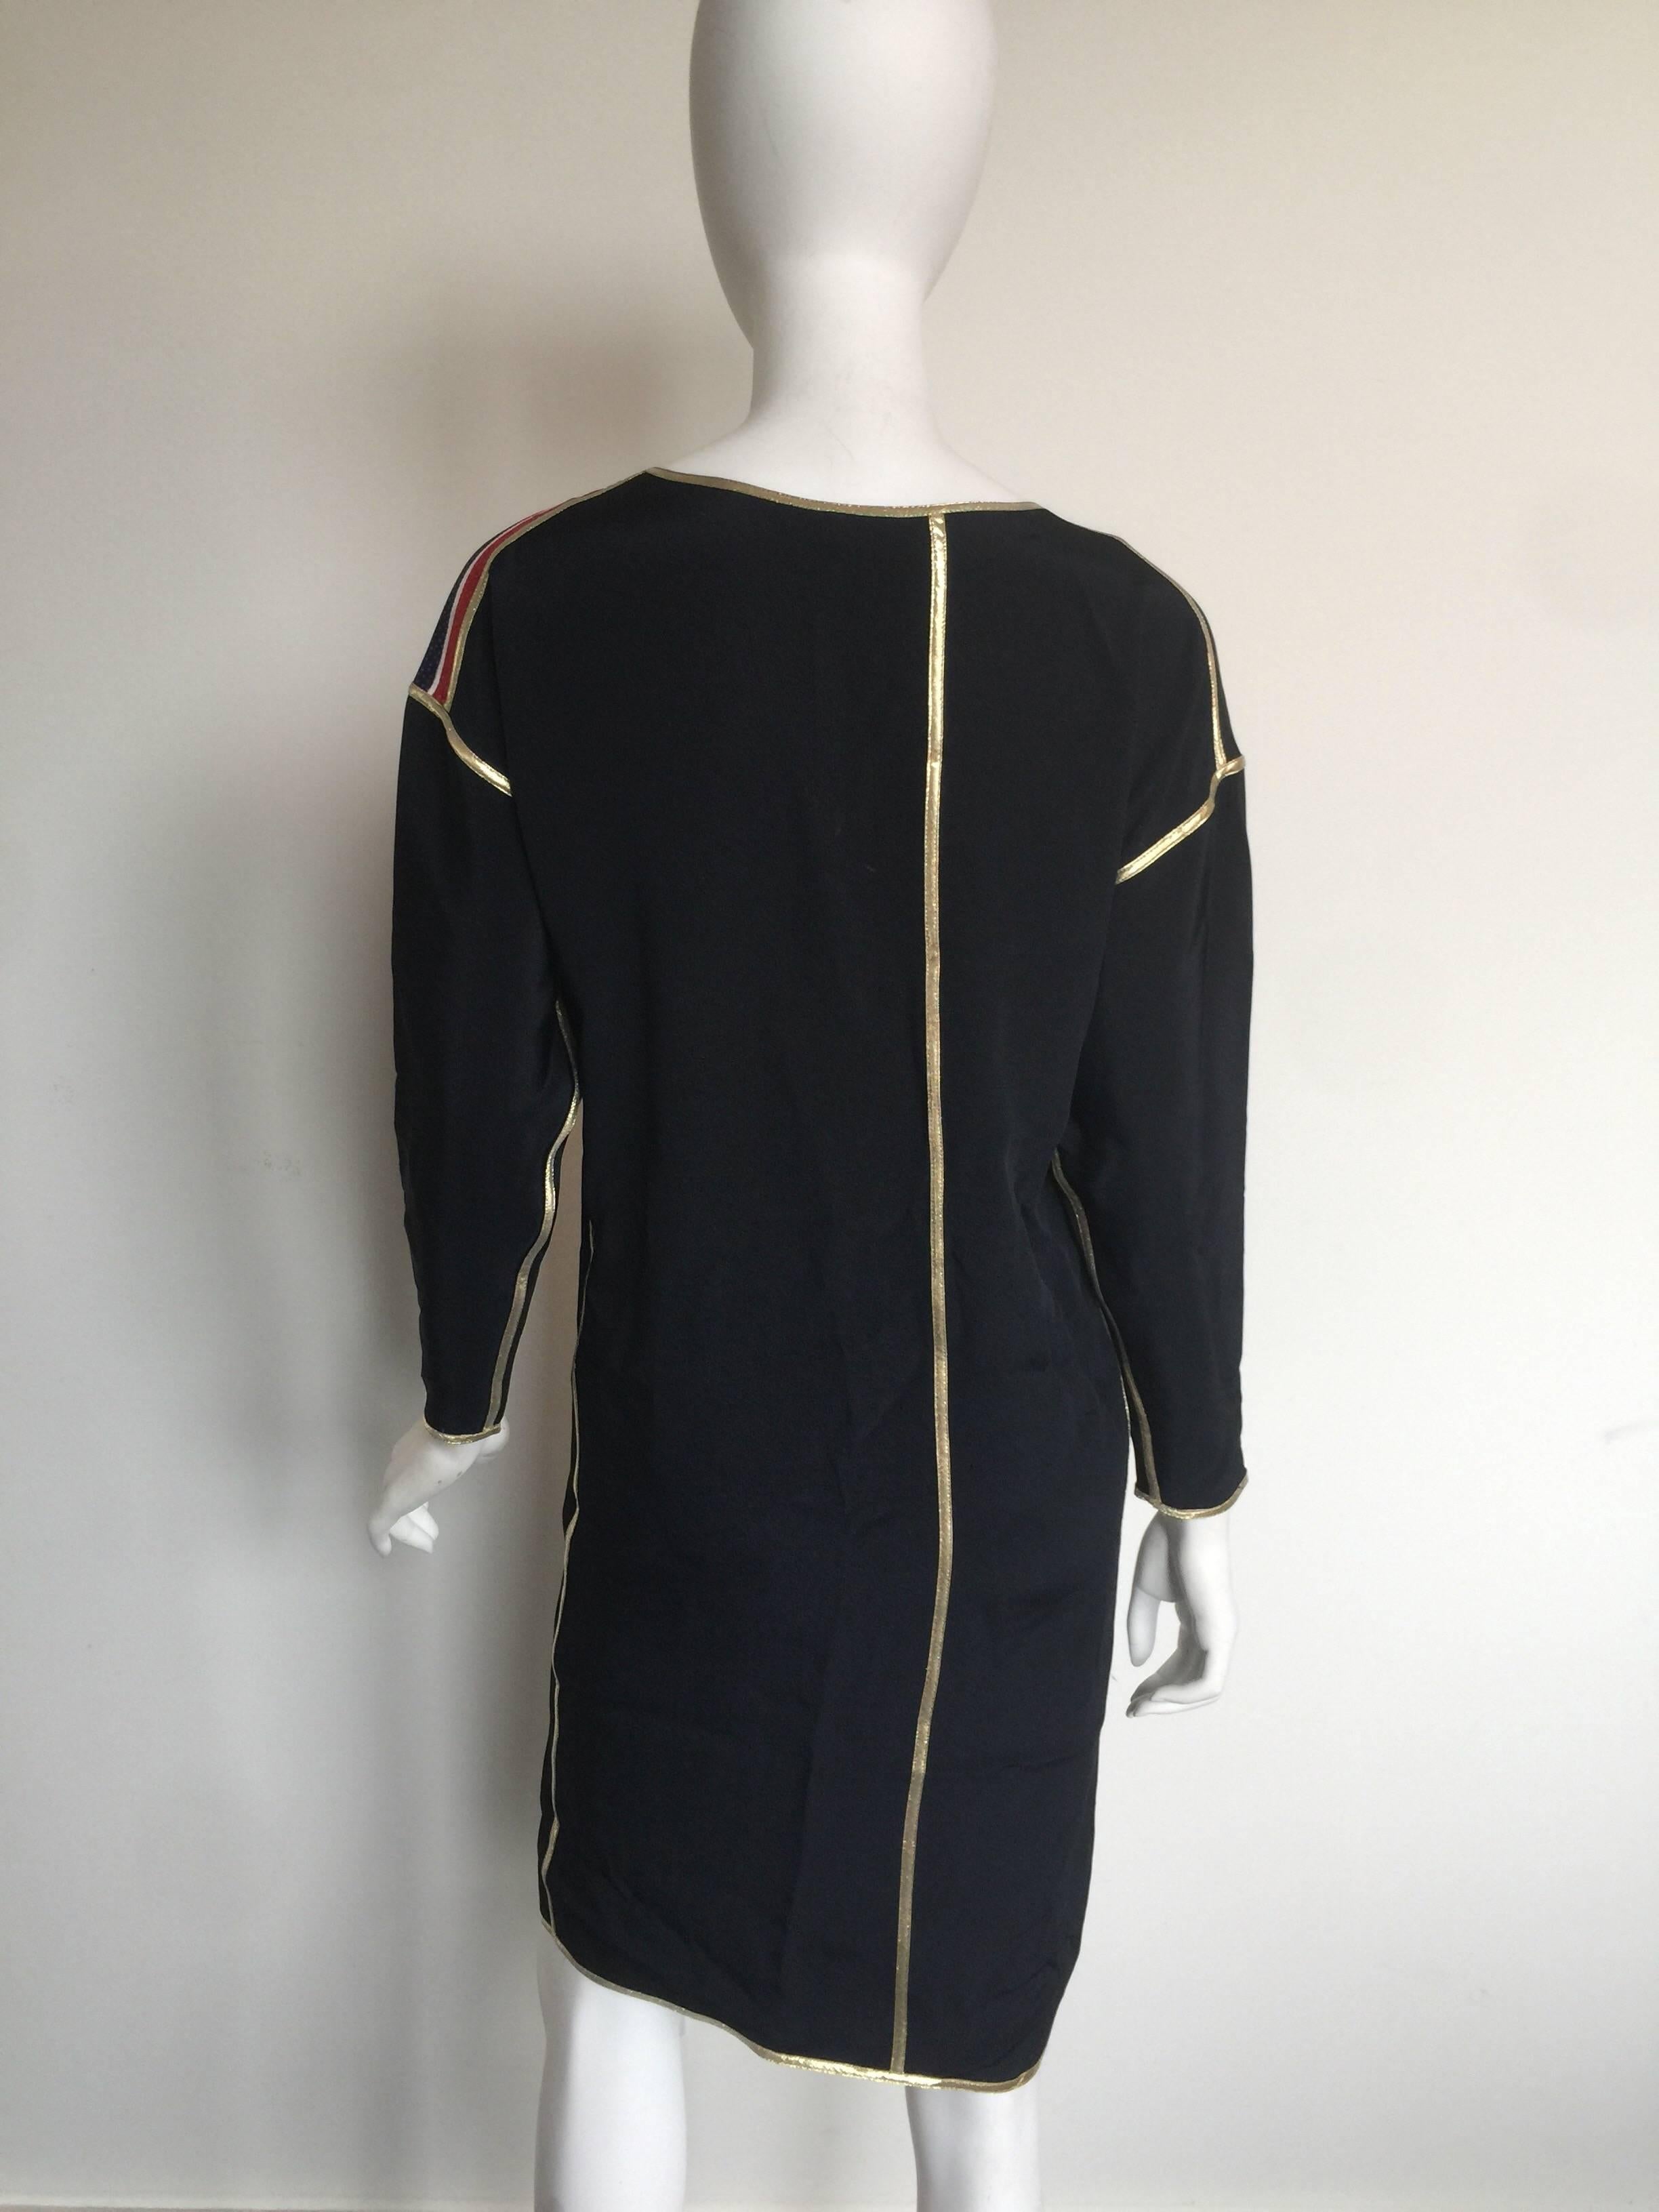 Geoffrey Beene Rainbow asymmetrical Stripe Dress In Good Condition For Sale In New York, NY